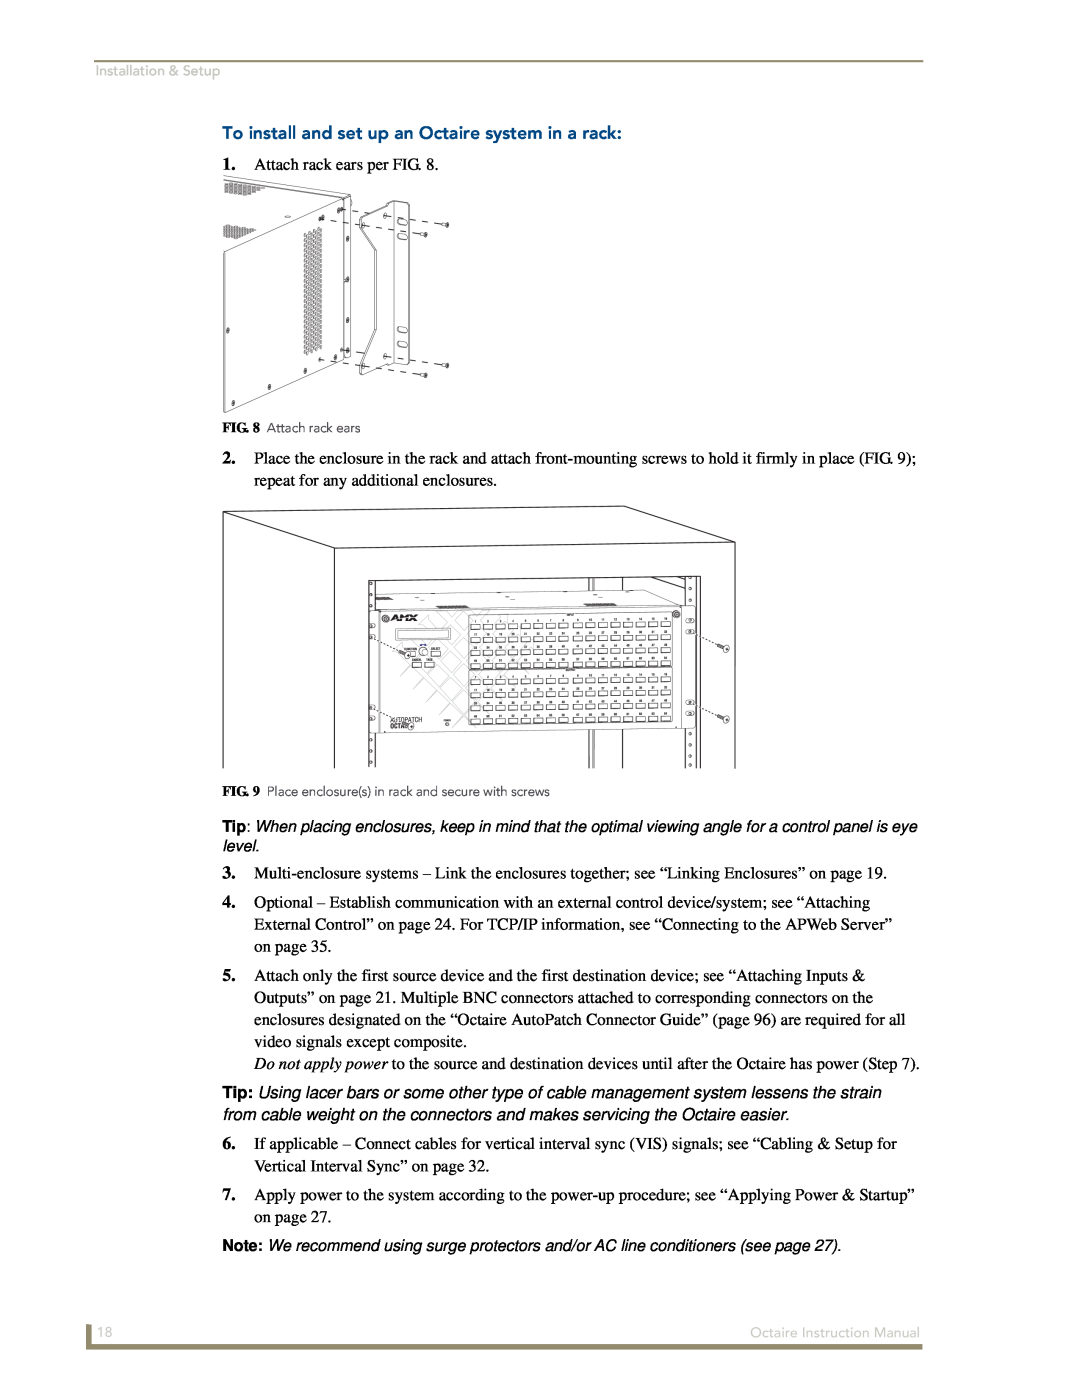 AMX instruction manual To install and set up an Octaire system in a rack, Attach rack ears per FIG 